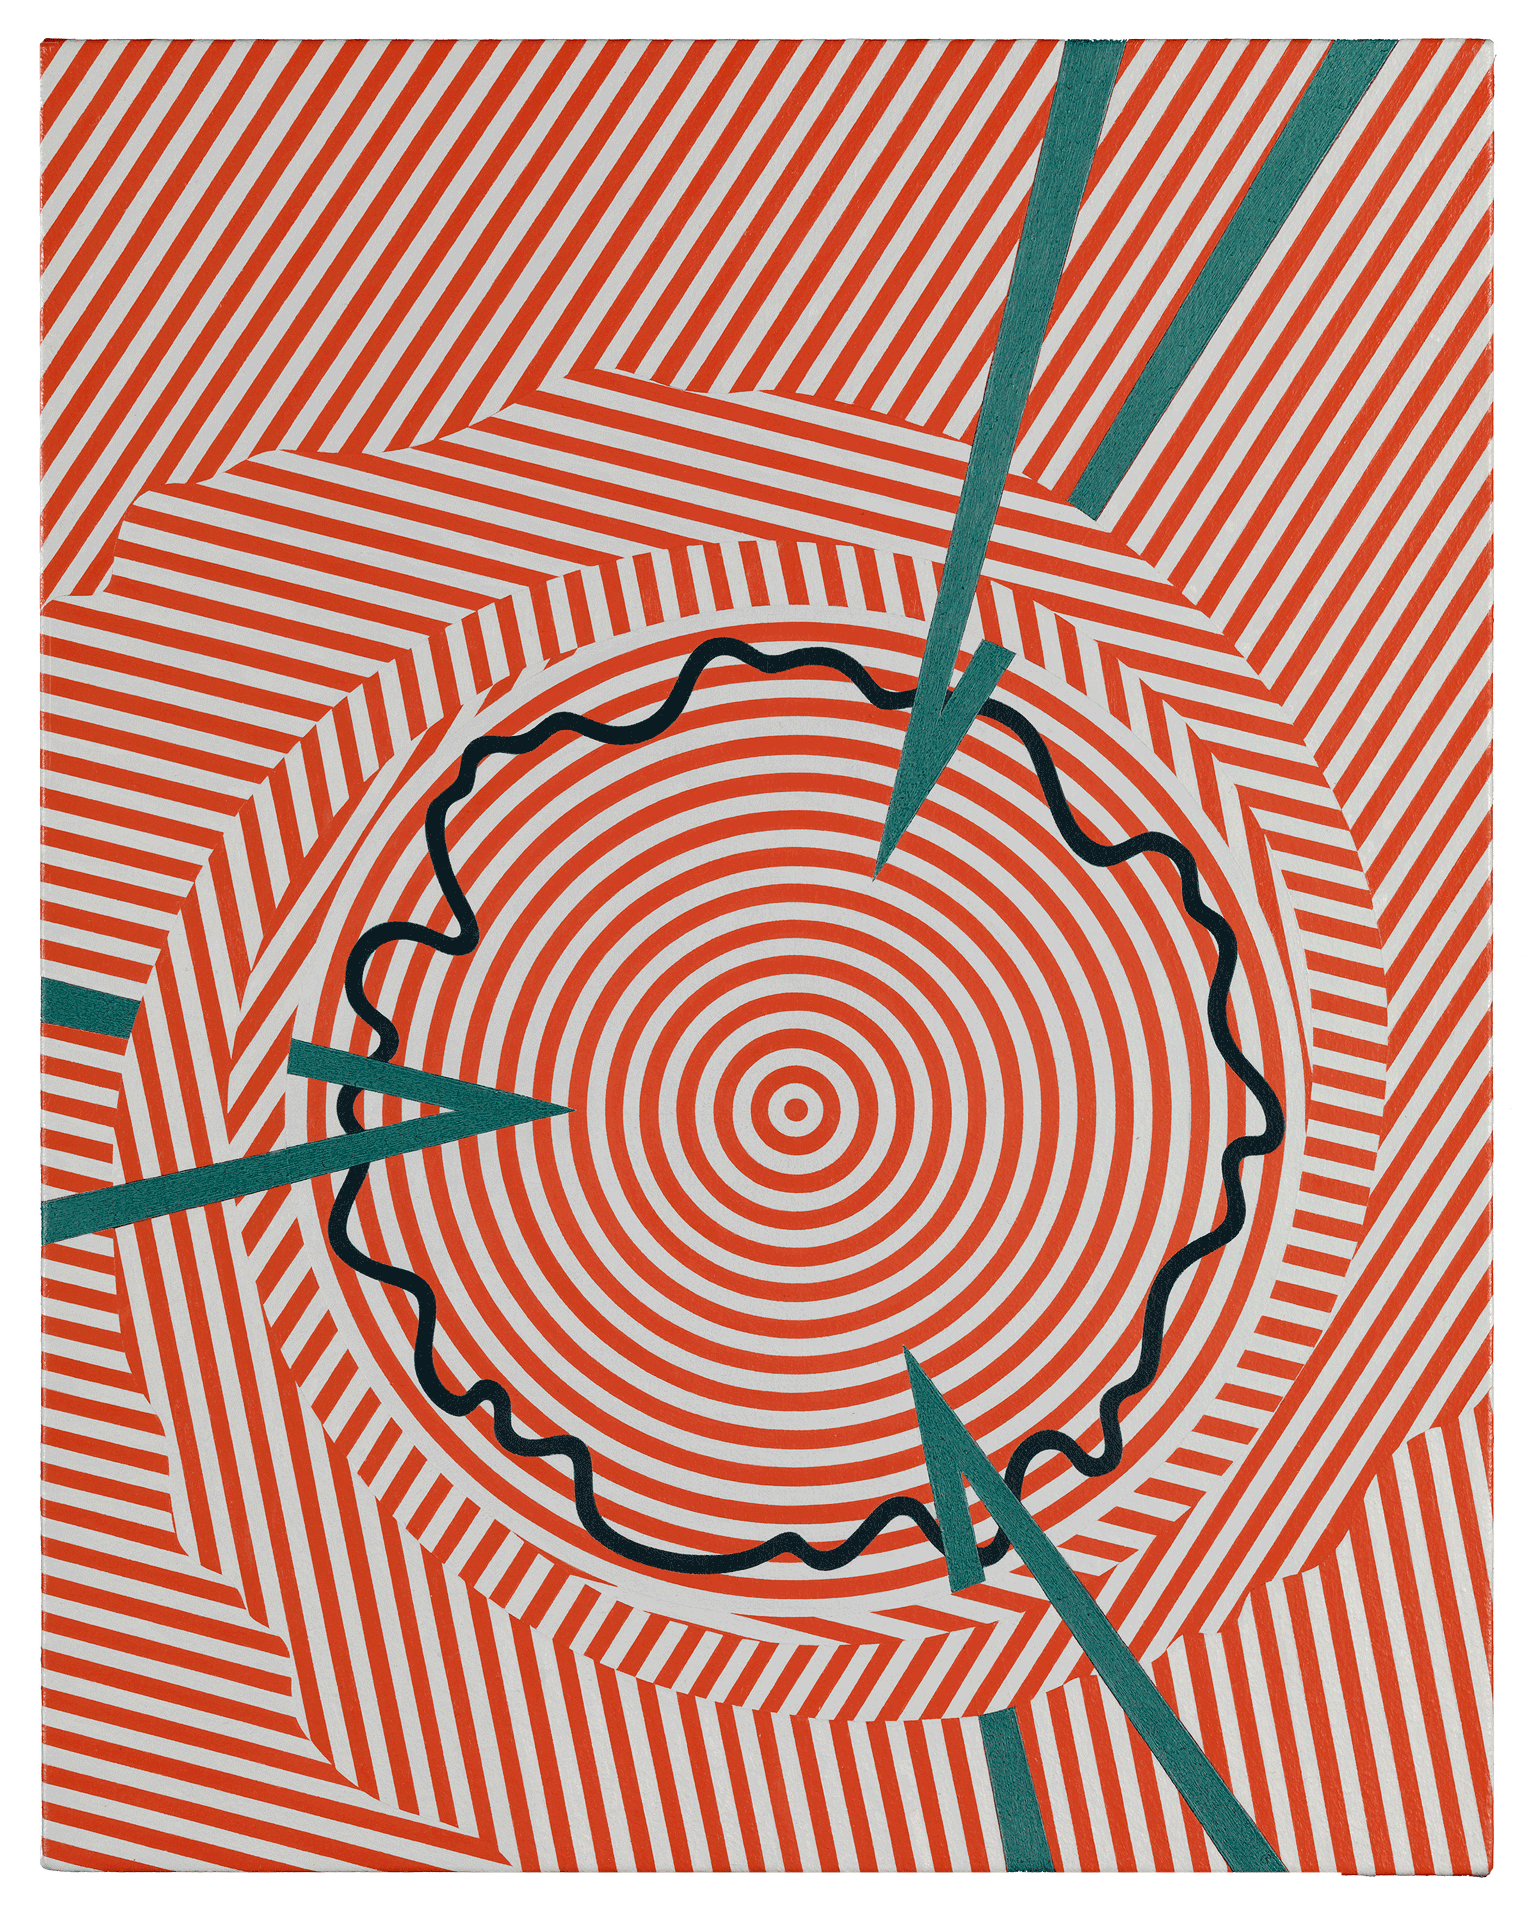 A painting by Tomma Abts, titled Feio, dated 2007. 